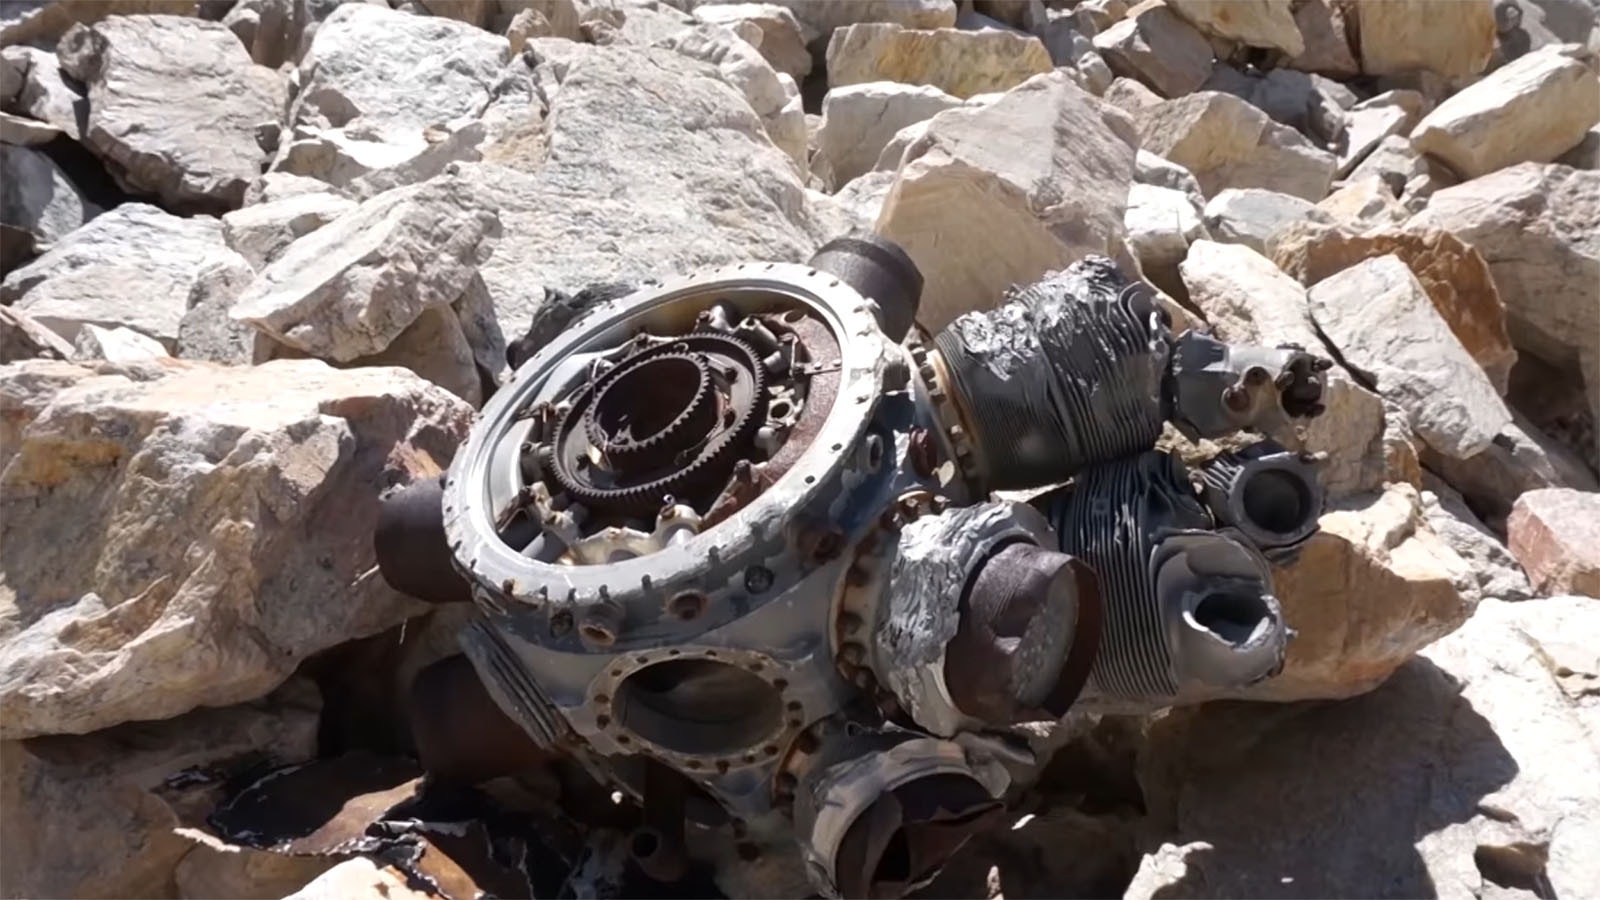 Nearly 70 years after United Airlines Flight 409 smashed into Medicine Bow Peak, killing all 66 onboard, pieces of the wreckage remain littered around the area.